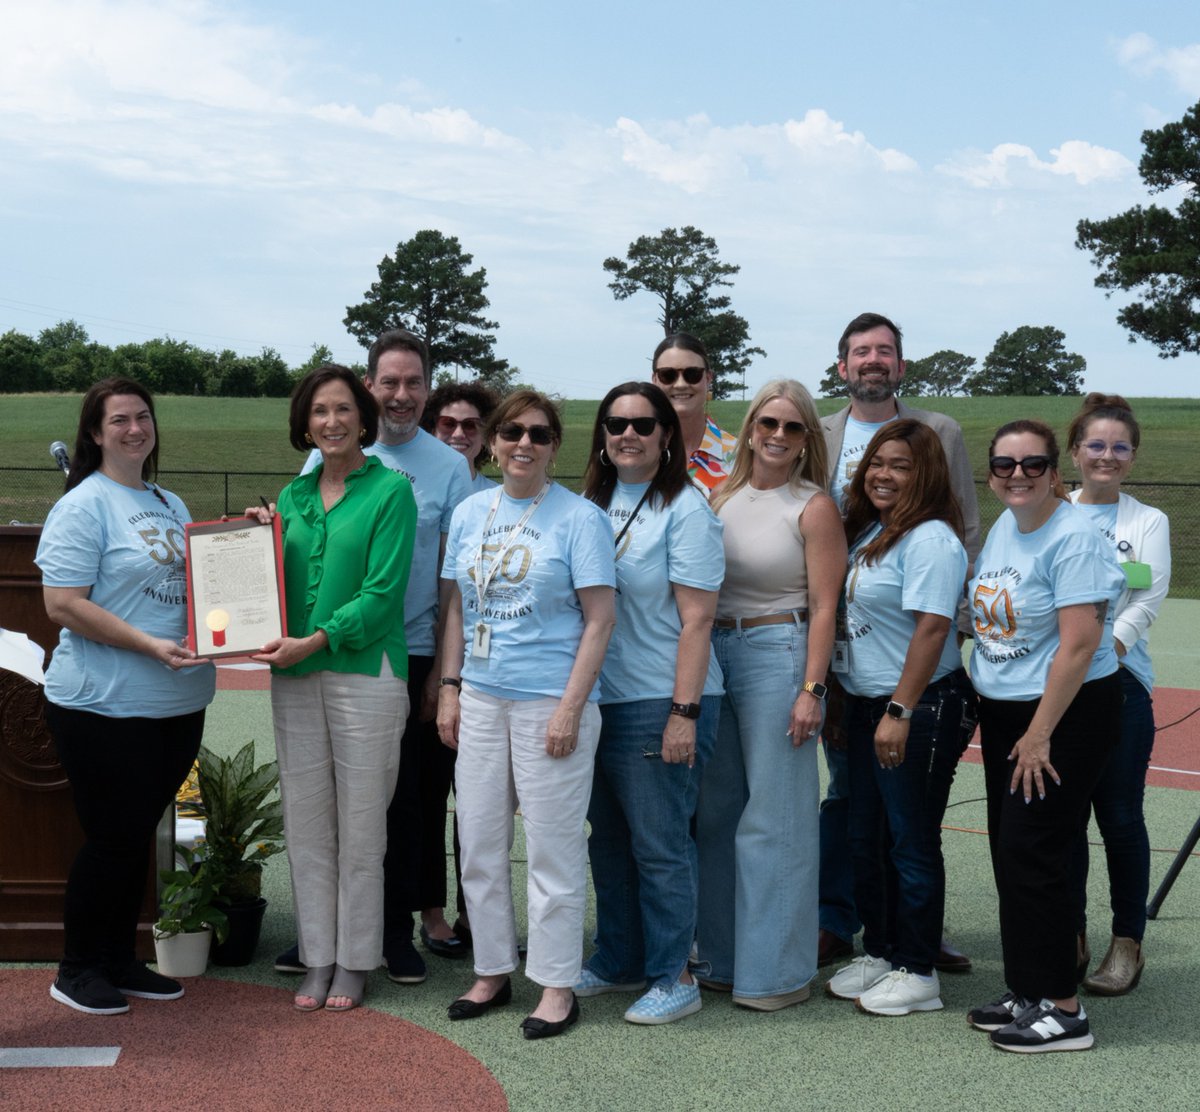 This month Commissioner Young and Senator @LoisKolkhorst joined HHSC staff, residents and their families to celebrate the 50th anniversary of the Brenham State Supported Living Center. Happy 50th anniversary to the Brenham SSLC! To learn more, visit: bit.ly/4dCLNmN